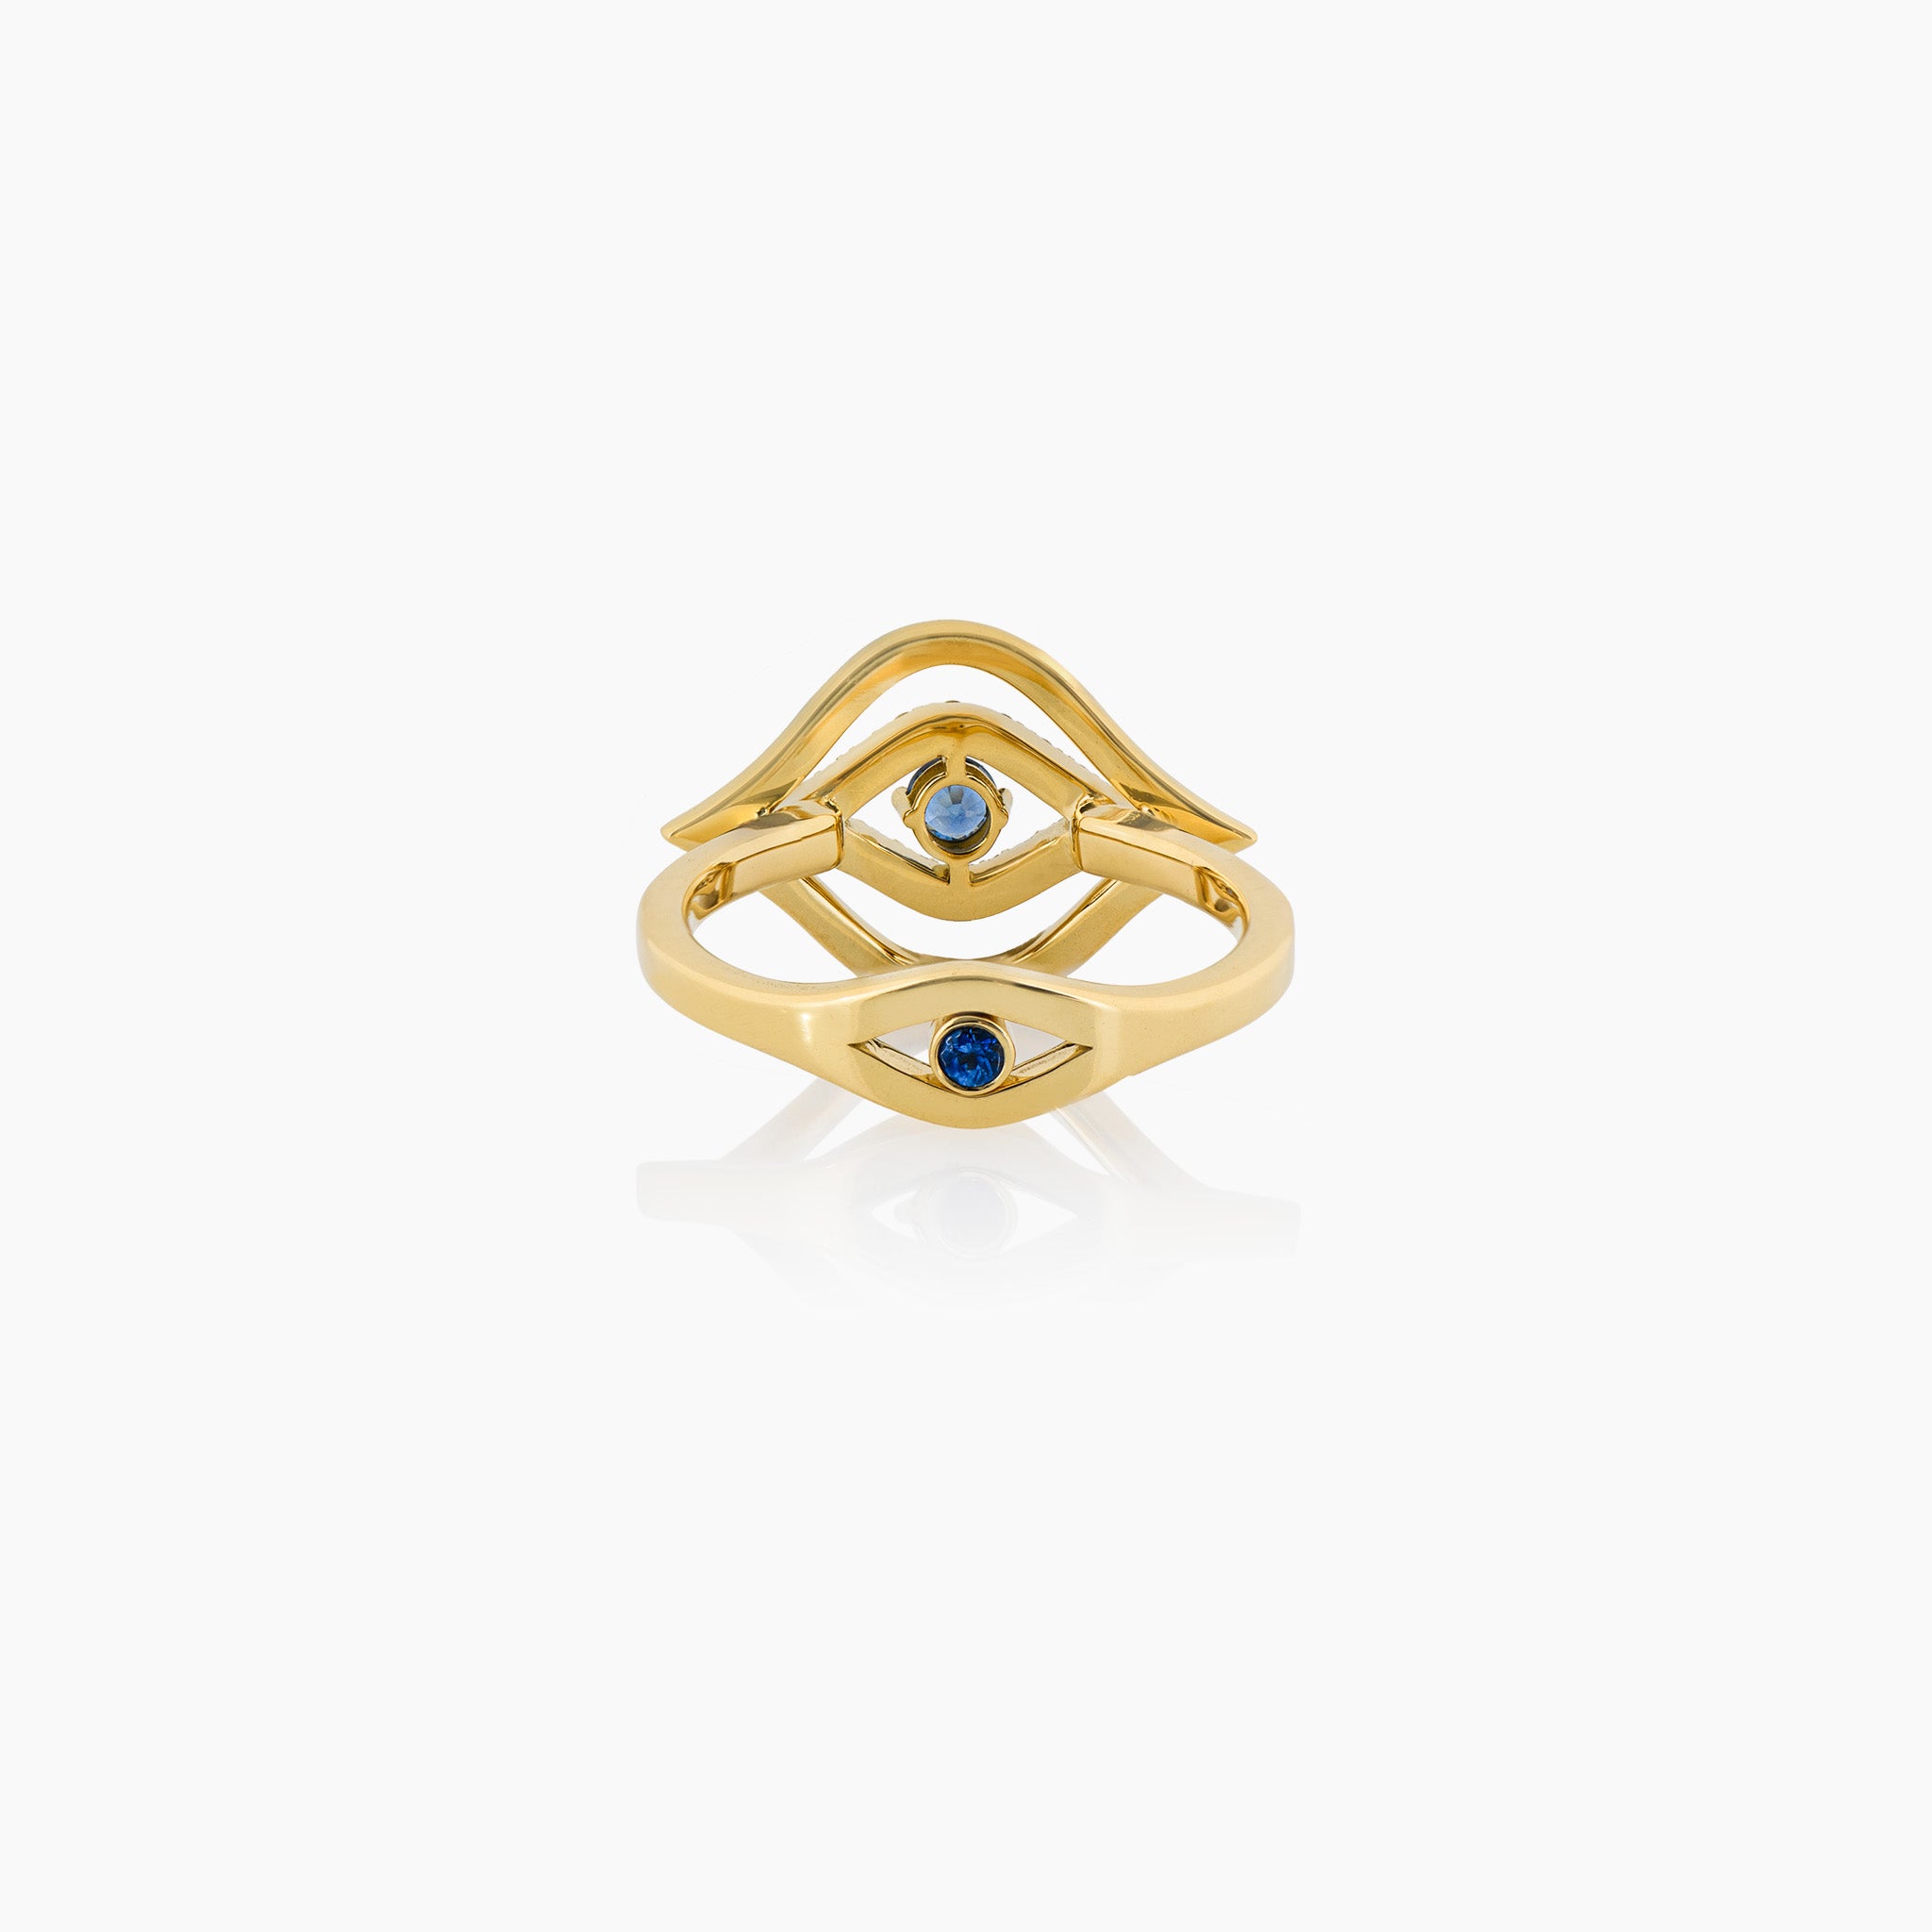 Diamond and Sapphire Ring: A stunning diamond and sapphire ring, presented on an off-white background.